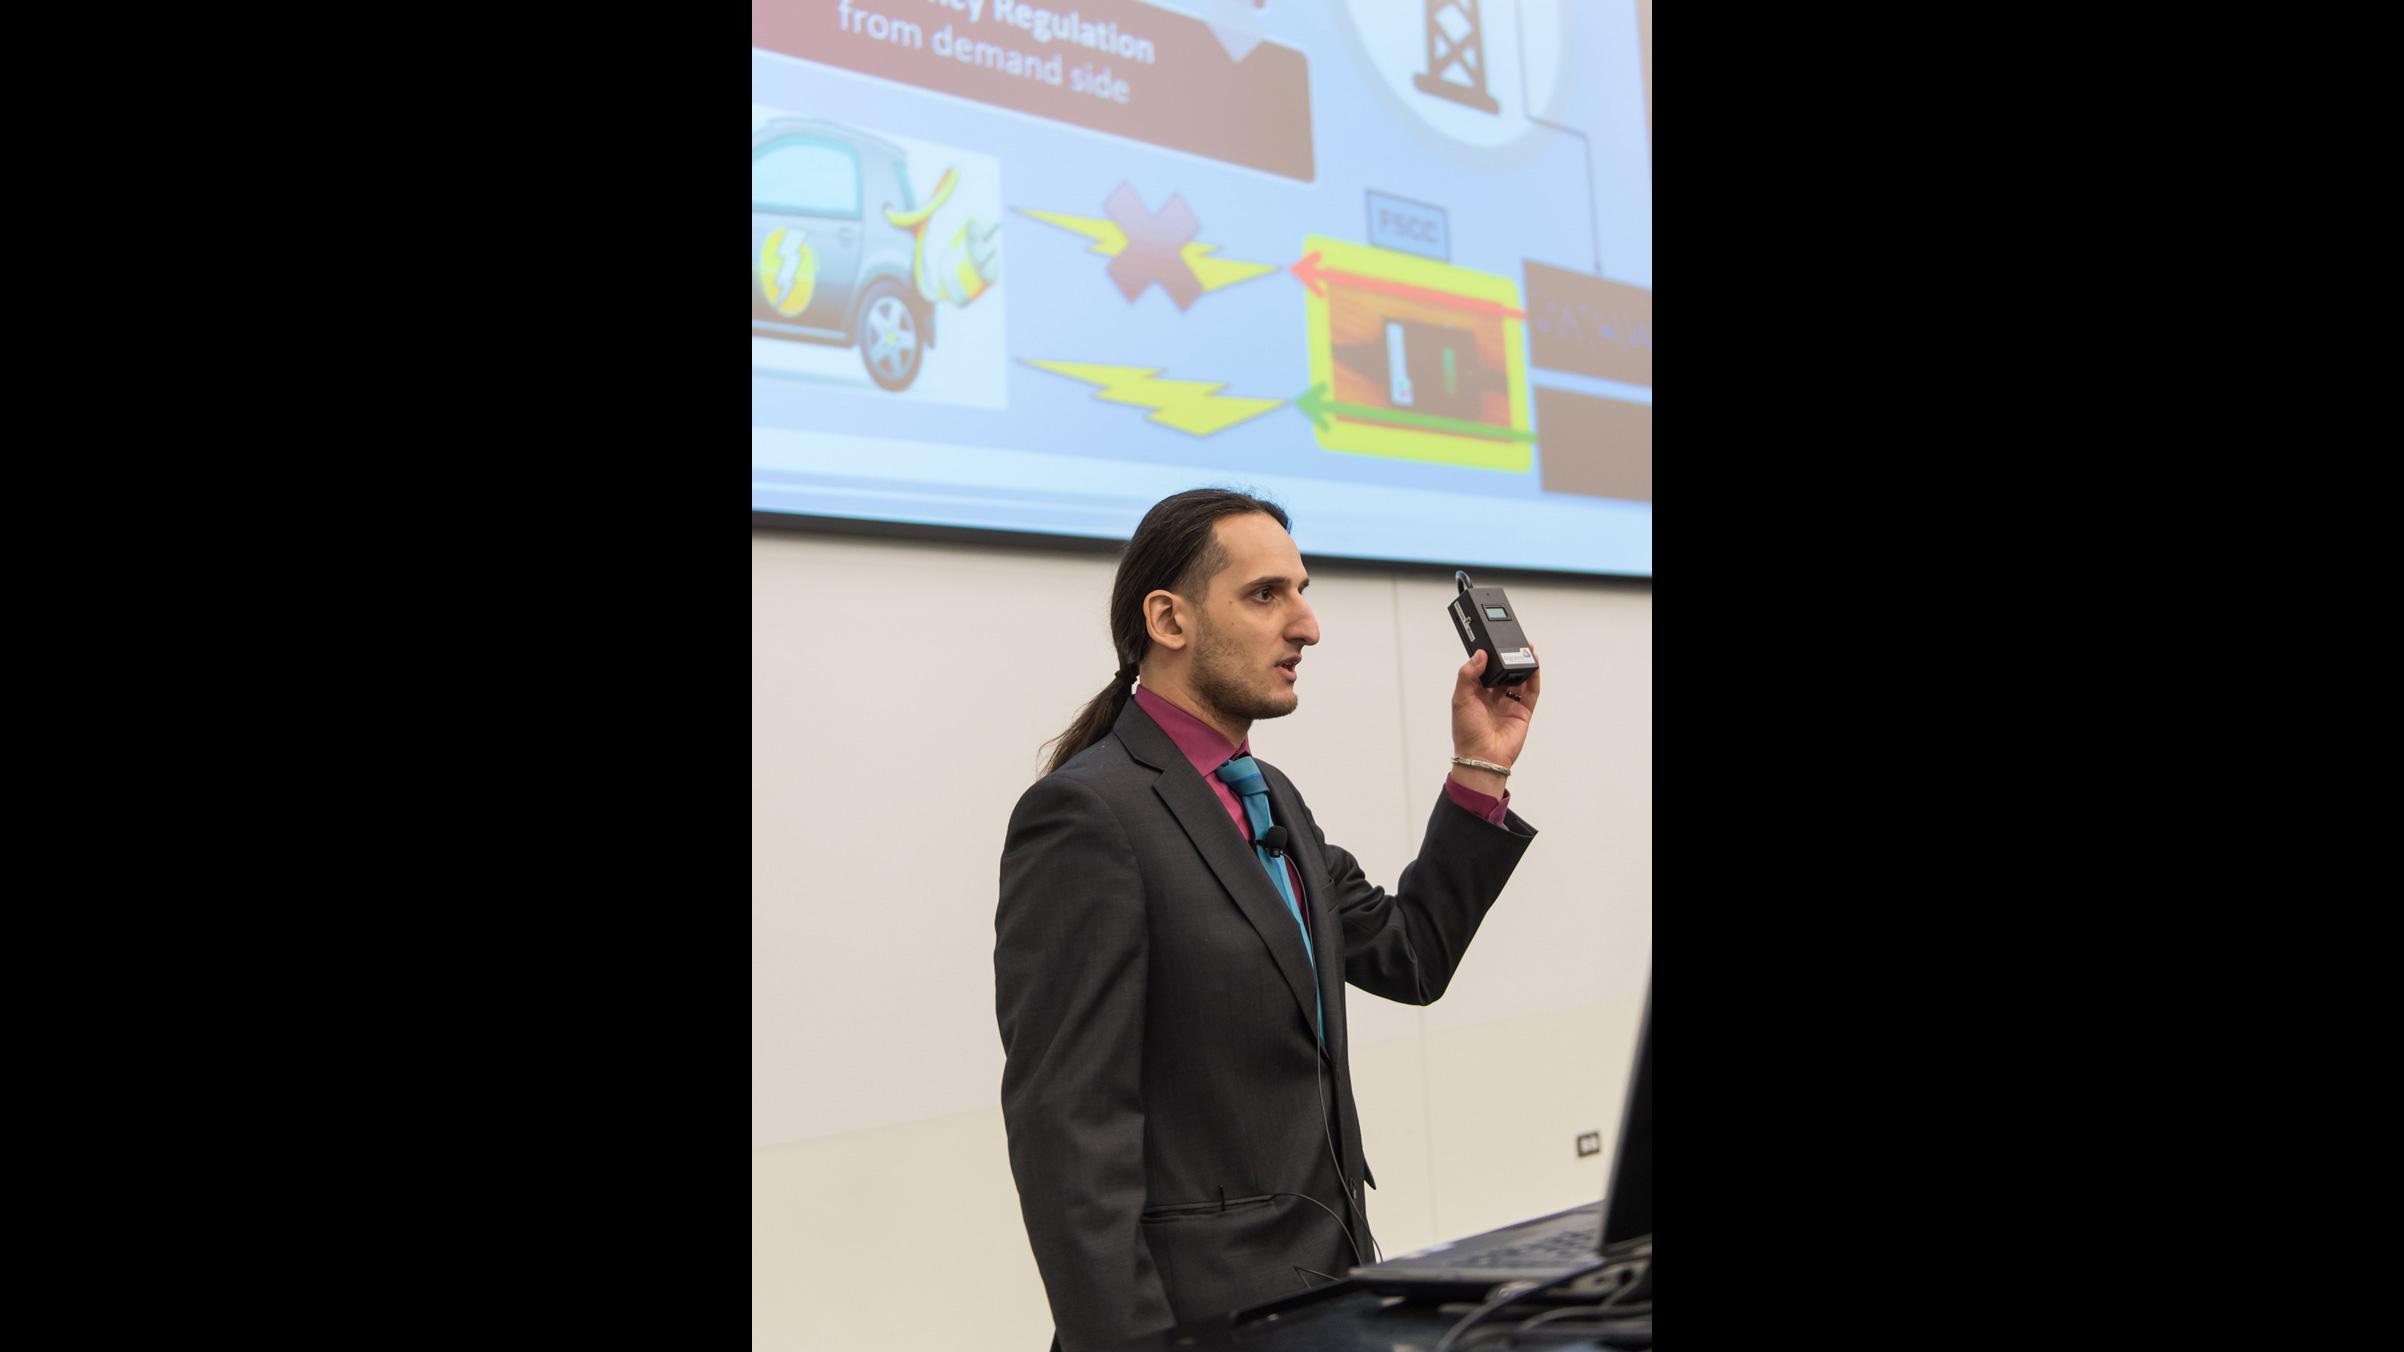 Diego Fazi from Argonne National Laboratory discusses technology at a laboratory pitch competition. He will moderate a pitch competition for innovations arising from work at Argonne on Sept. 14. (Courtesy Argonne National Laboratory)